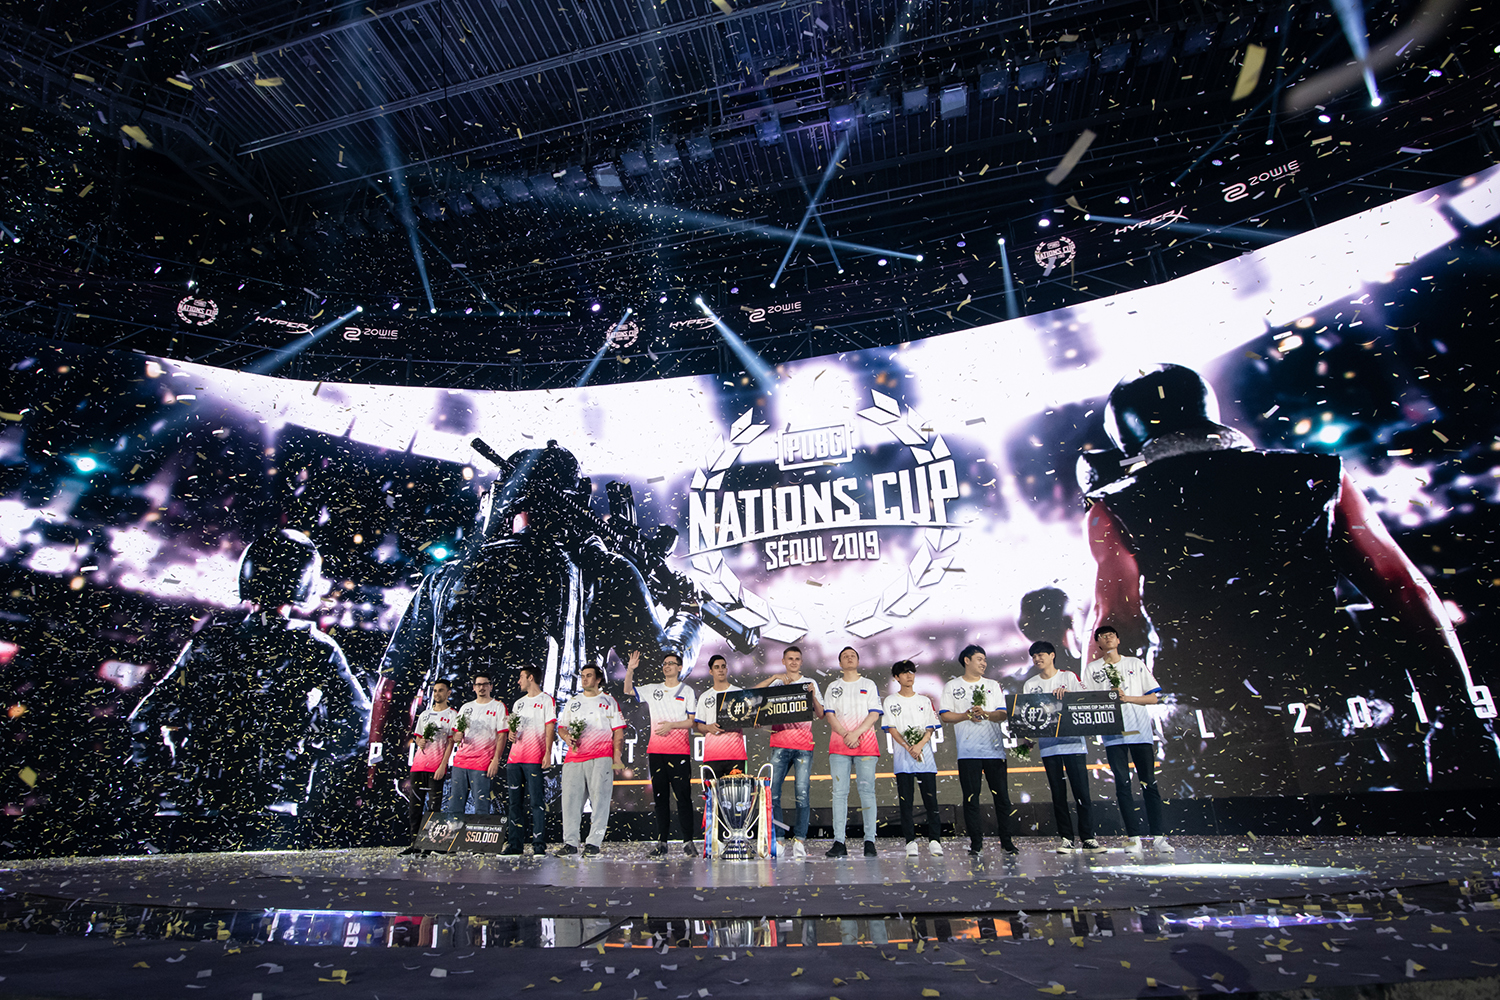 Pubg nations cup 2019